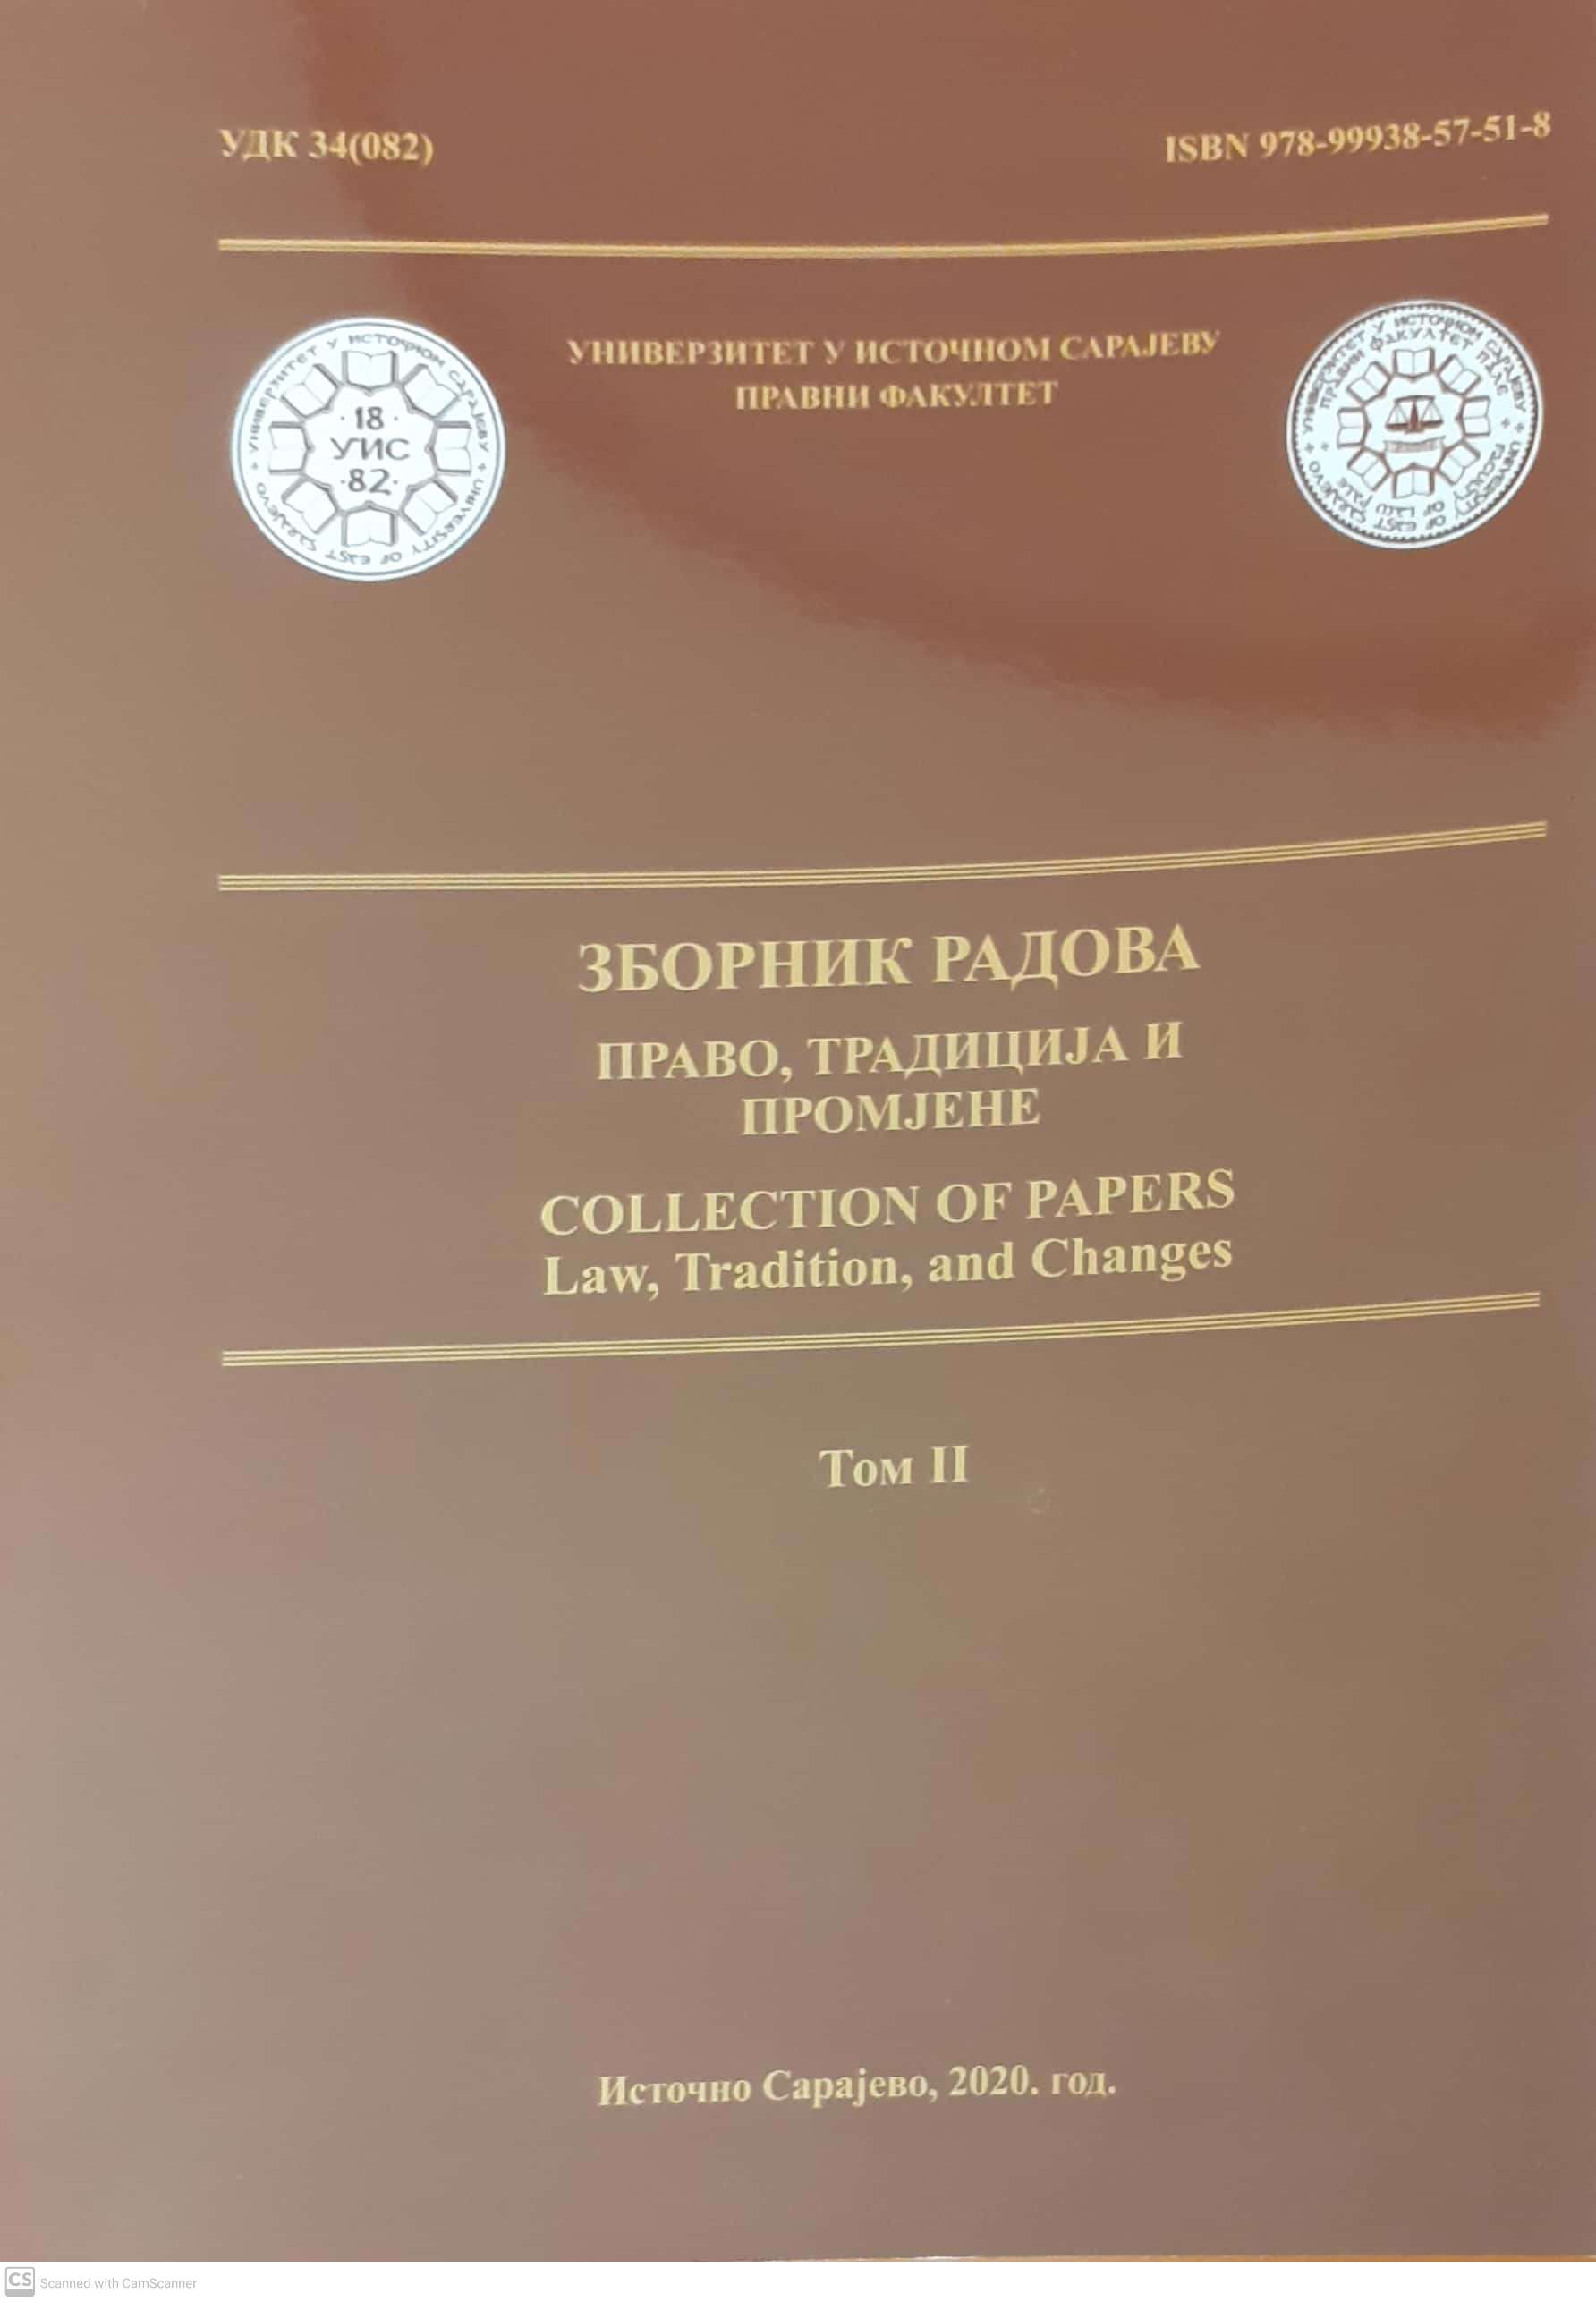 Reform of Criminal Offenses Against Honor and Reputation in the Croatian Criminal Legislation With Reference to Judical Practice Cover Image